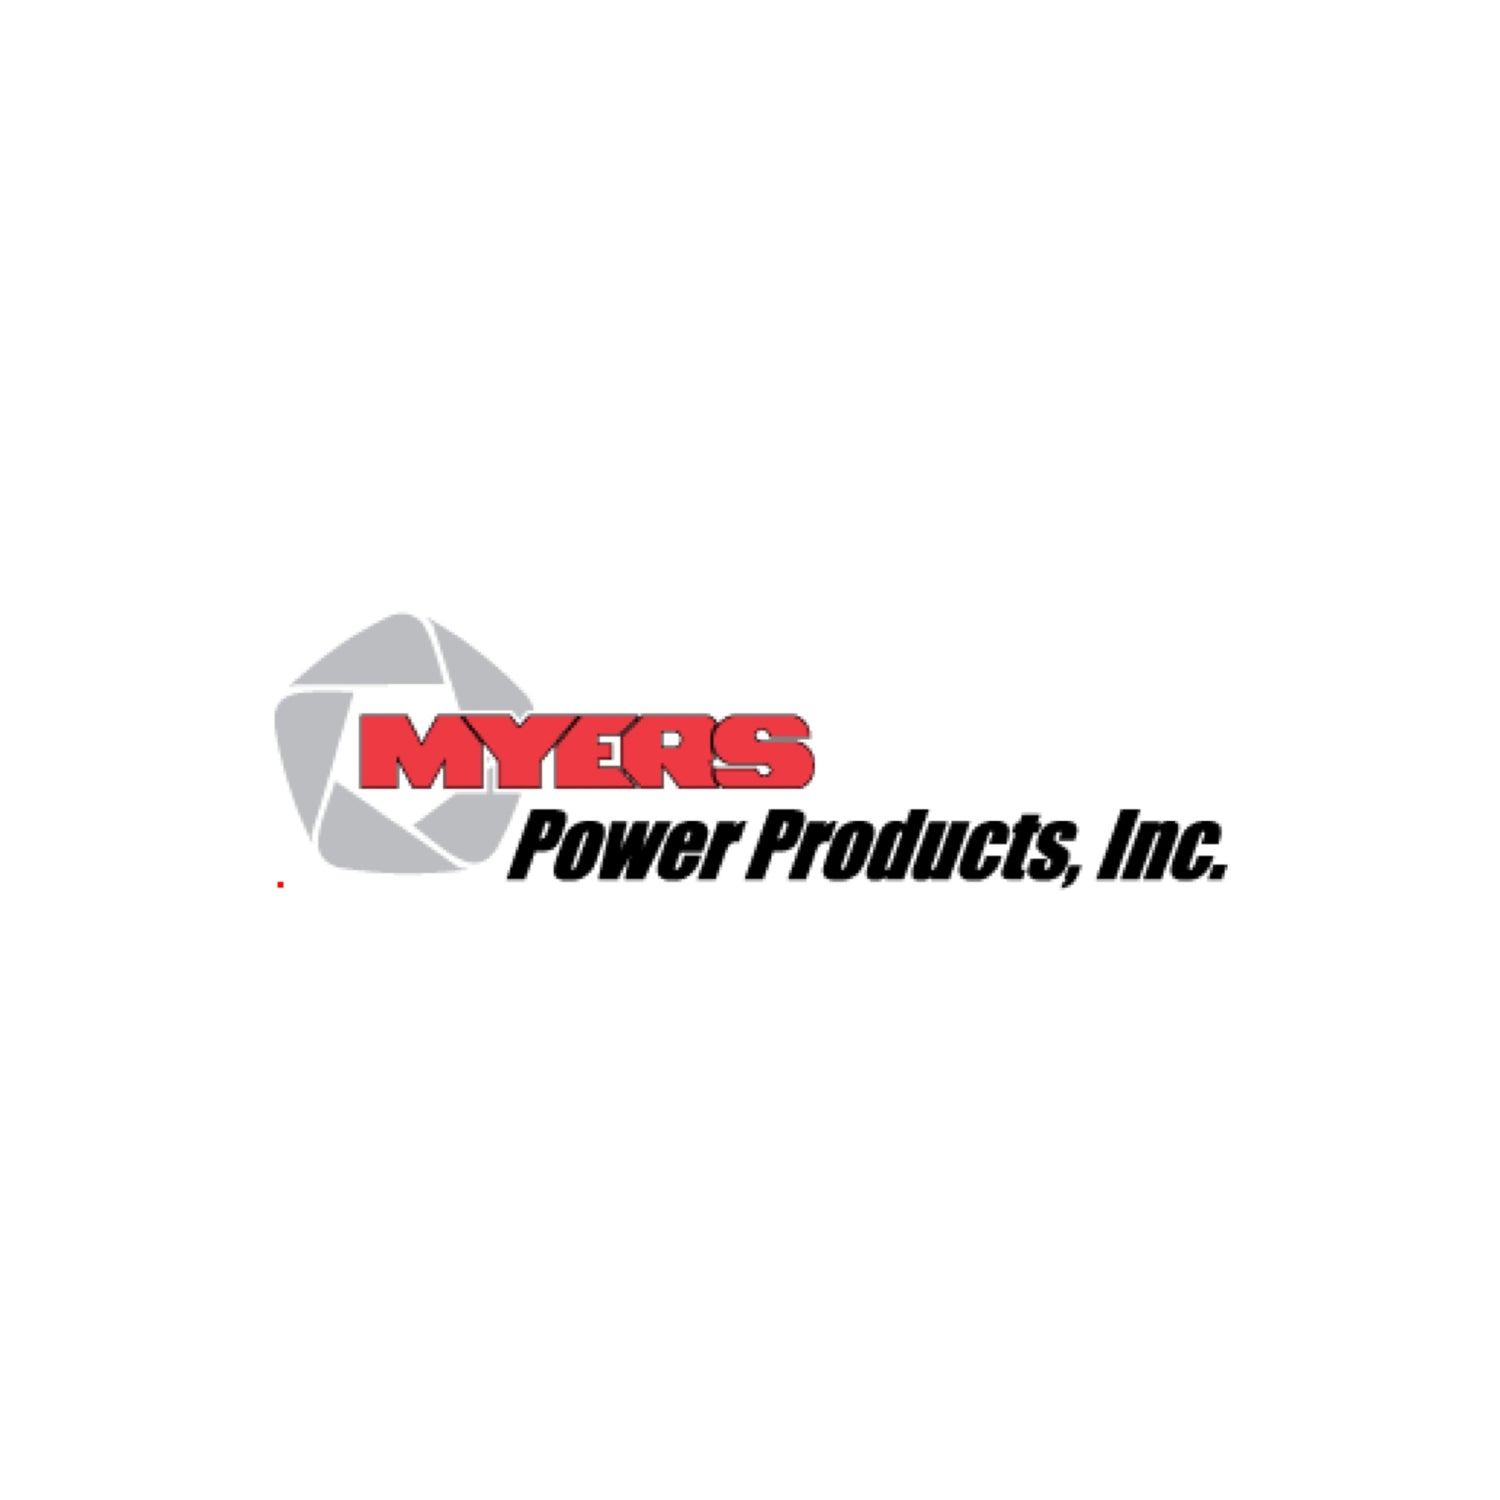 MYERS POWER PRODUCTS INC.